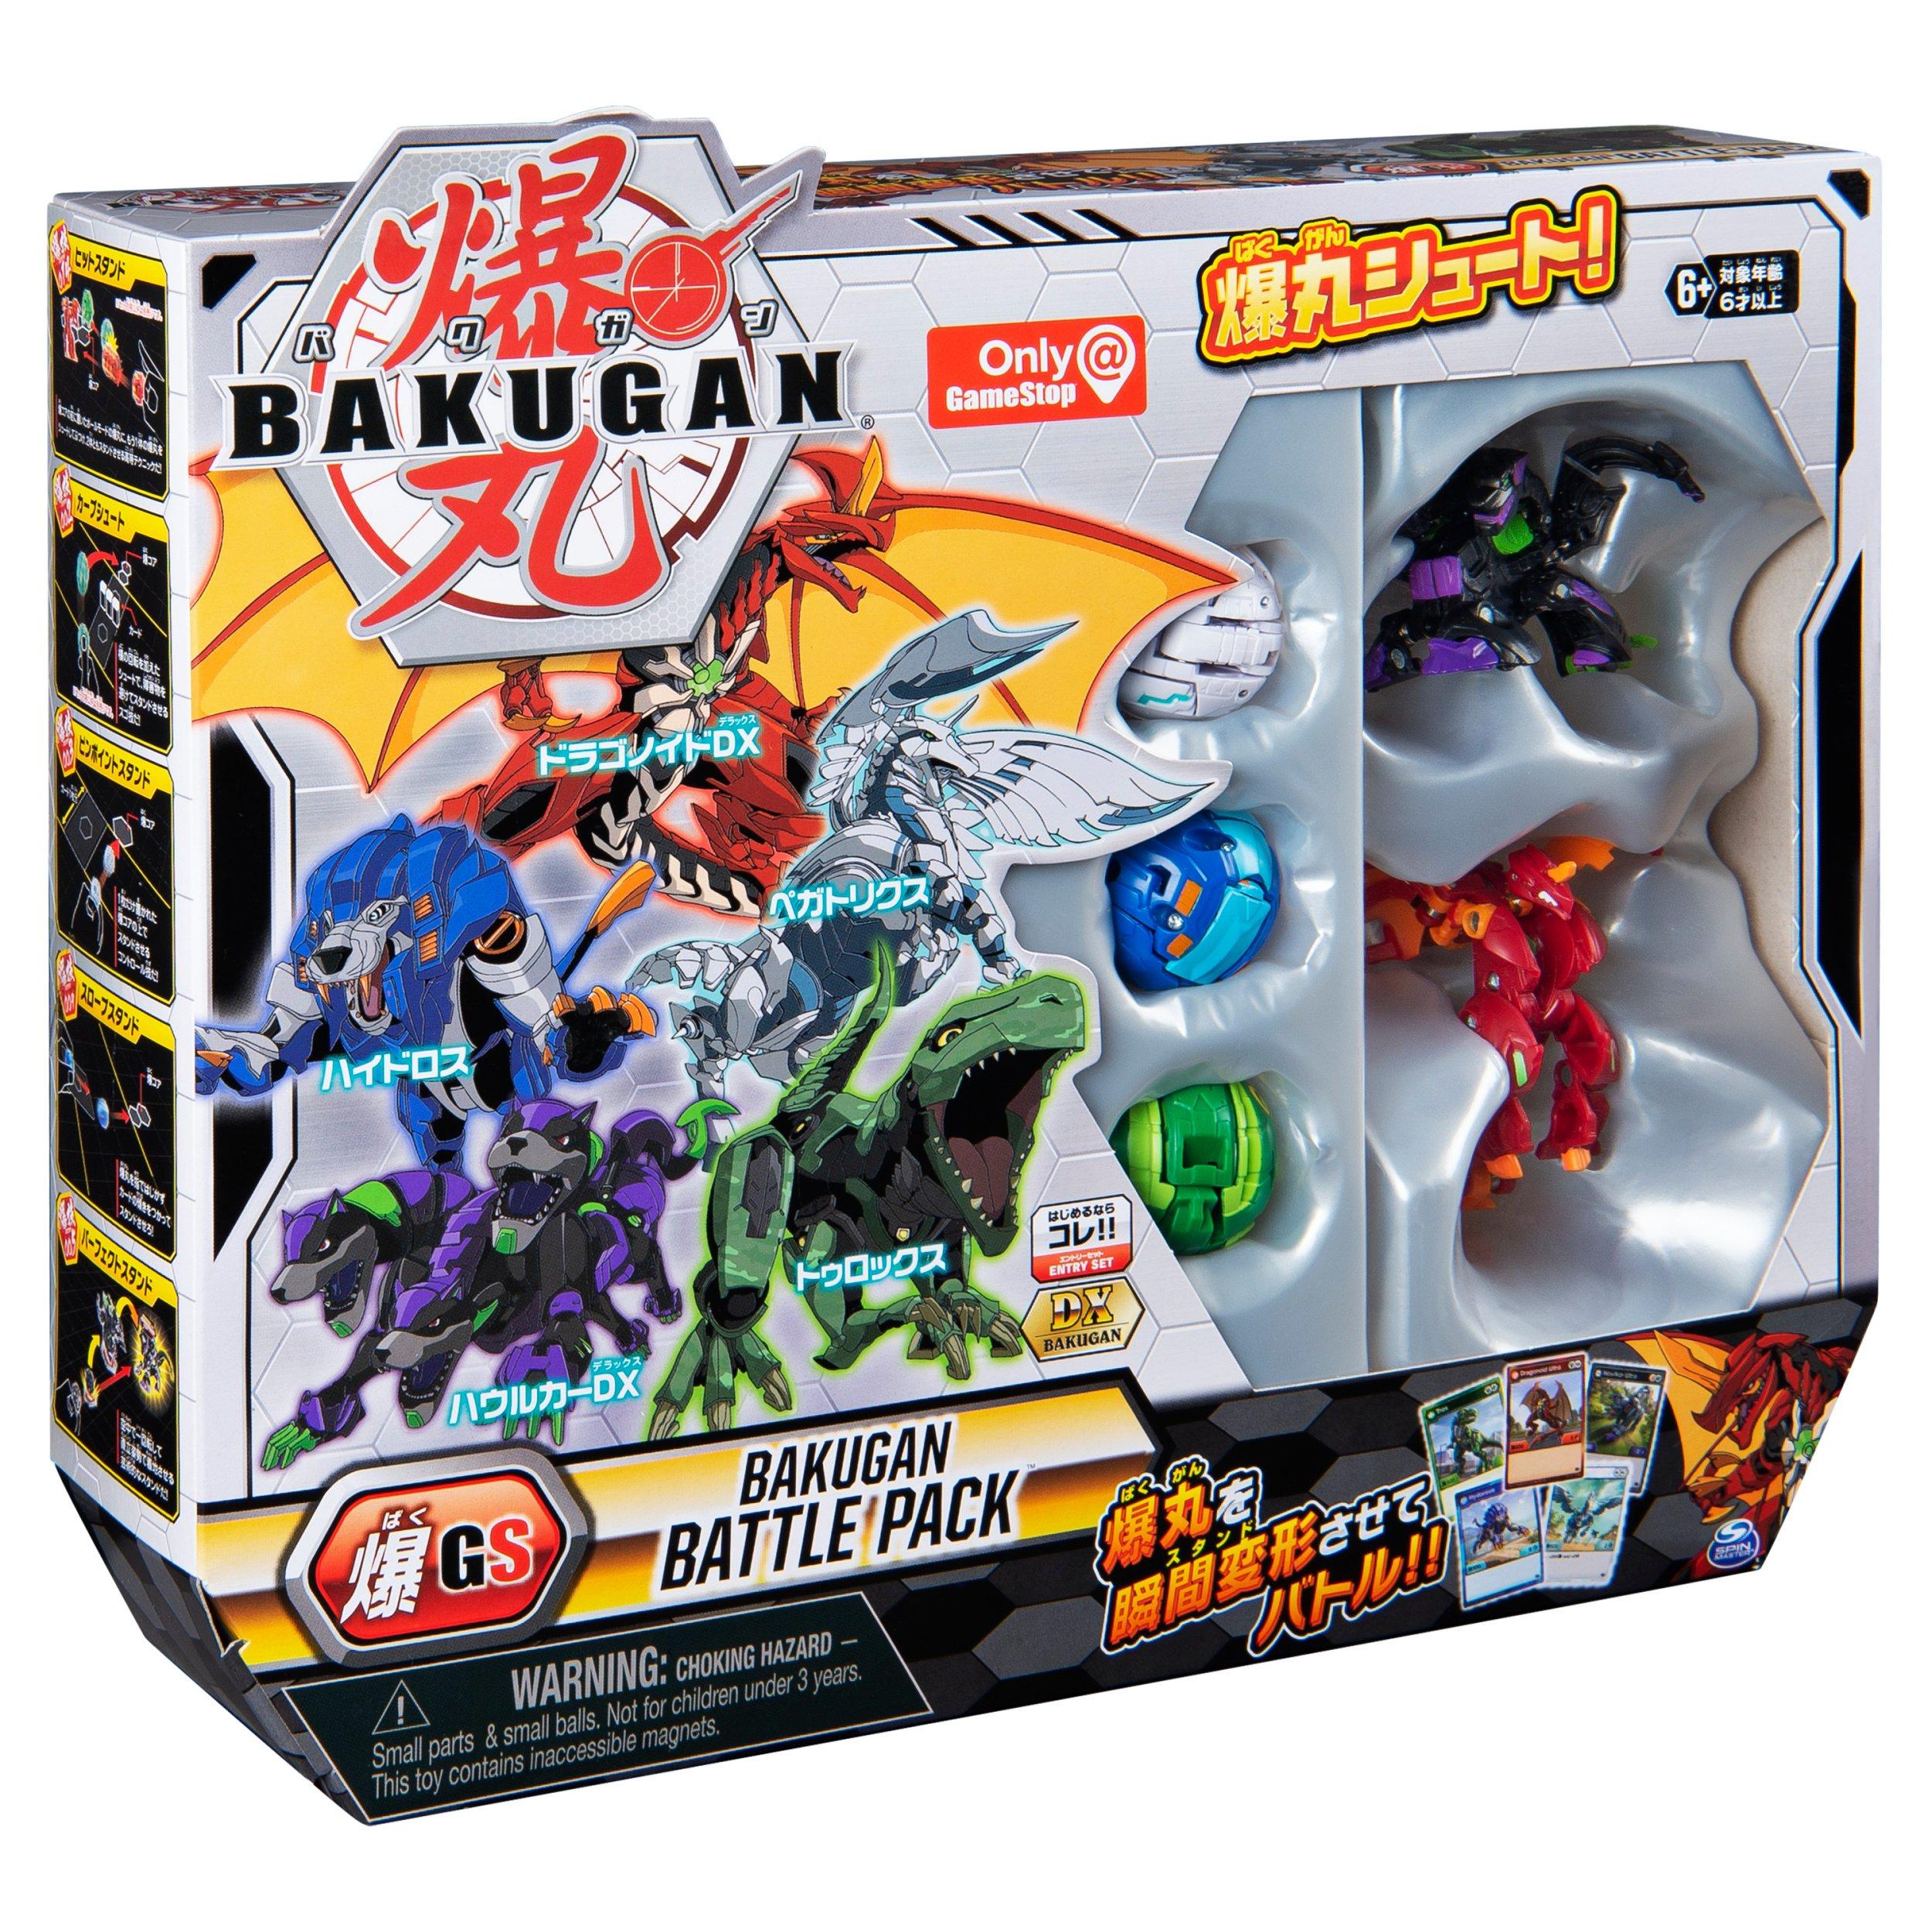 Bakugan Battle Pack 5 Pack Only at 